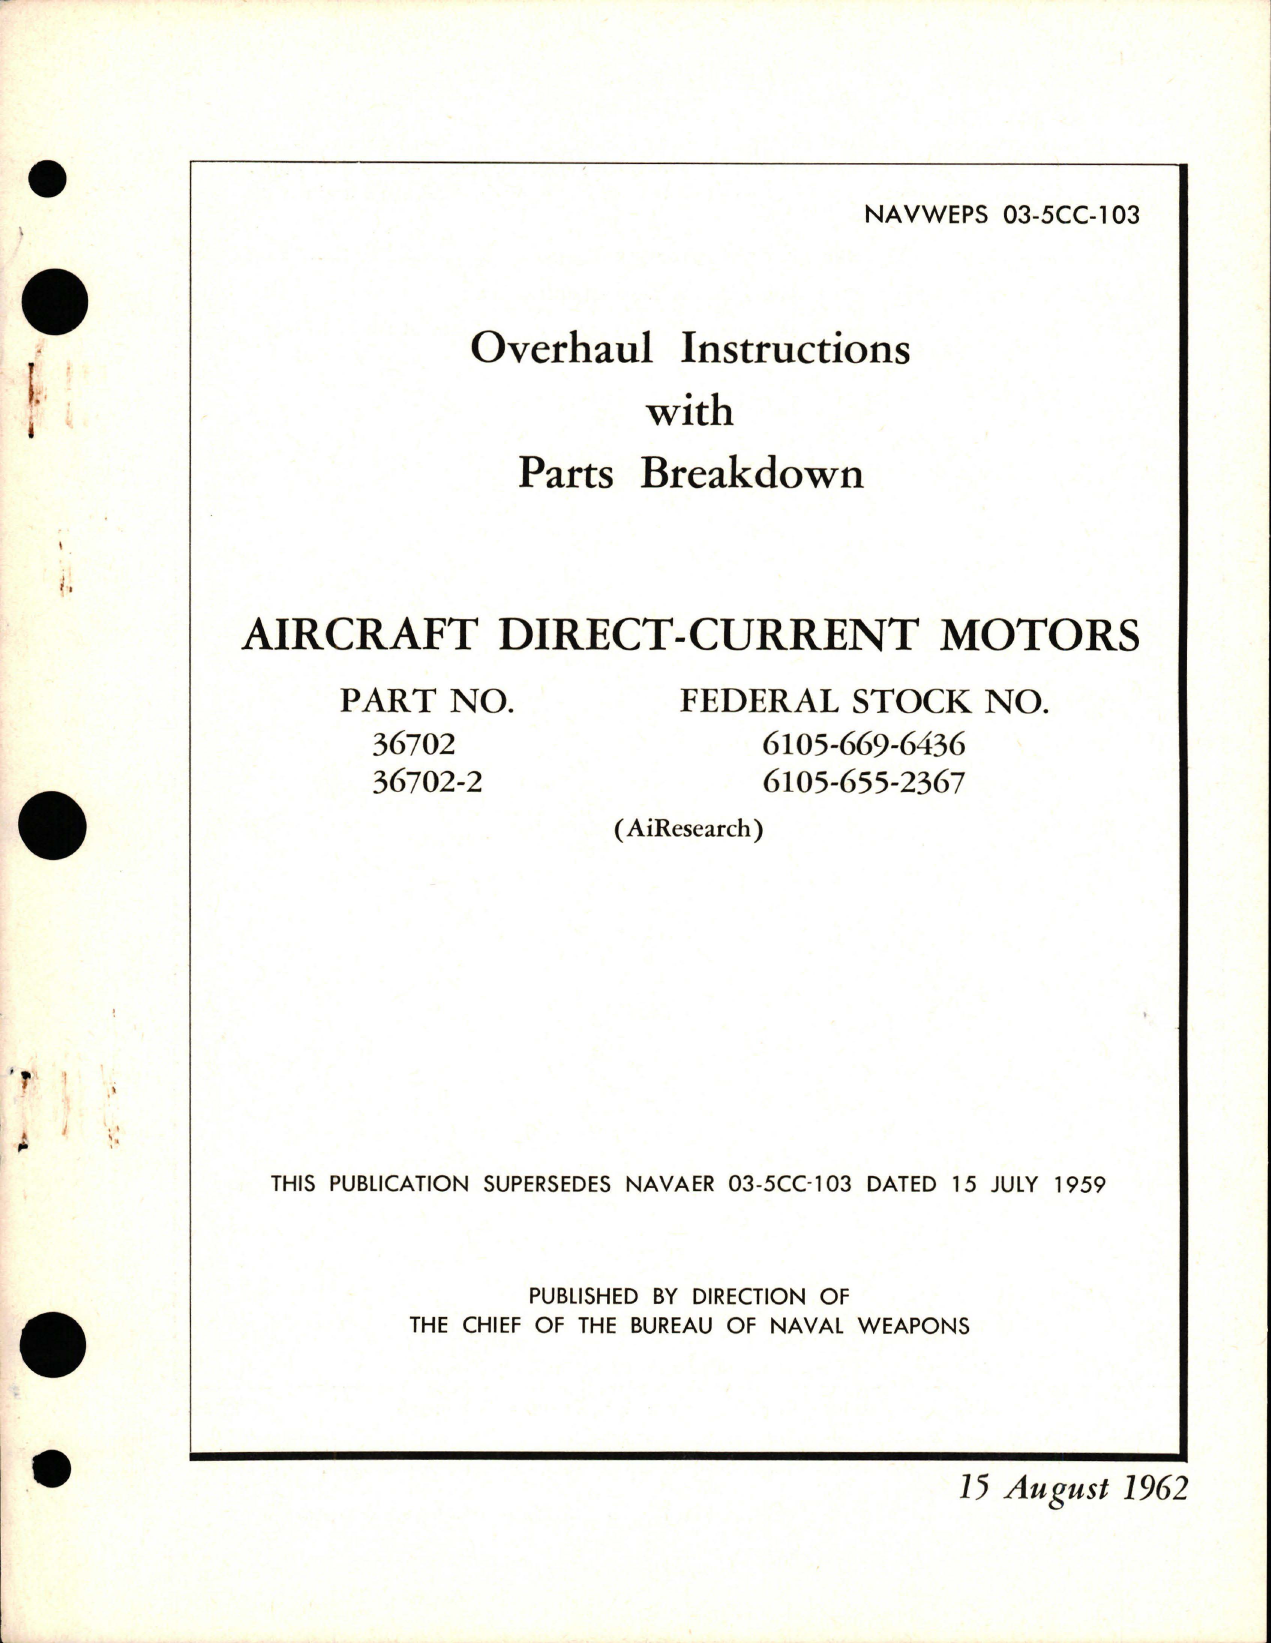 Sample page 1 from AirCorps Library document: Overhaul Instructions with Parts Breakdown for Direct-Current Motors - Parts 36702 and 36702-2